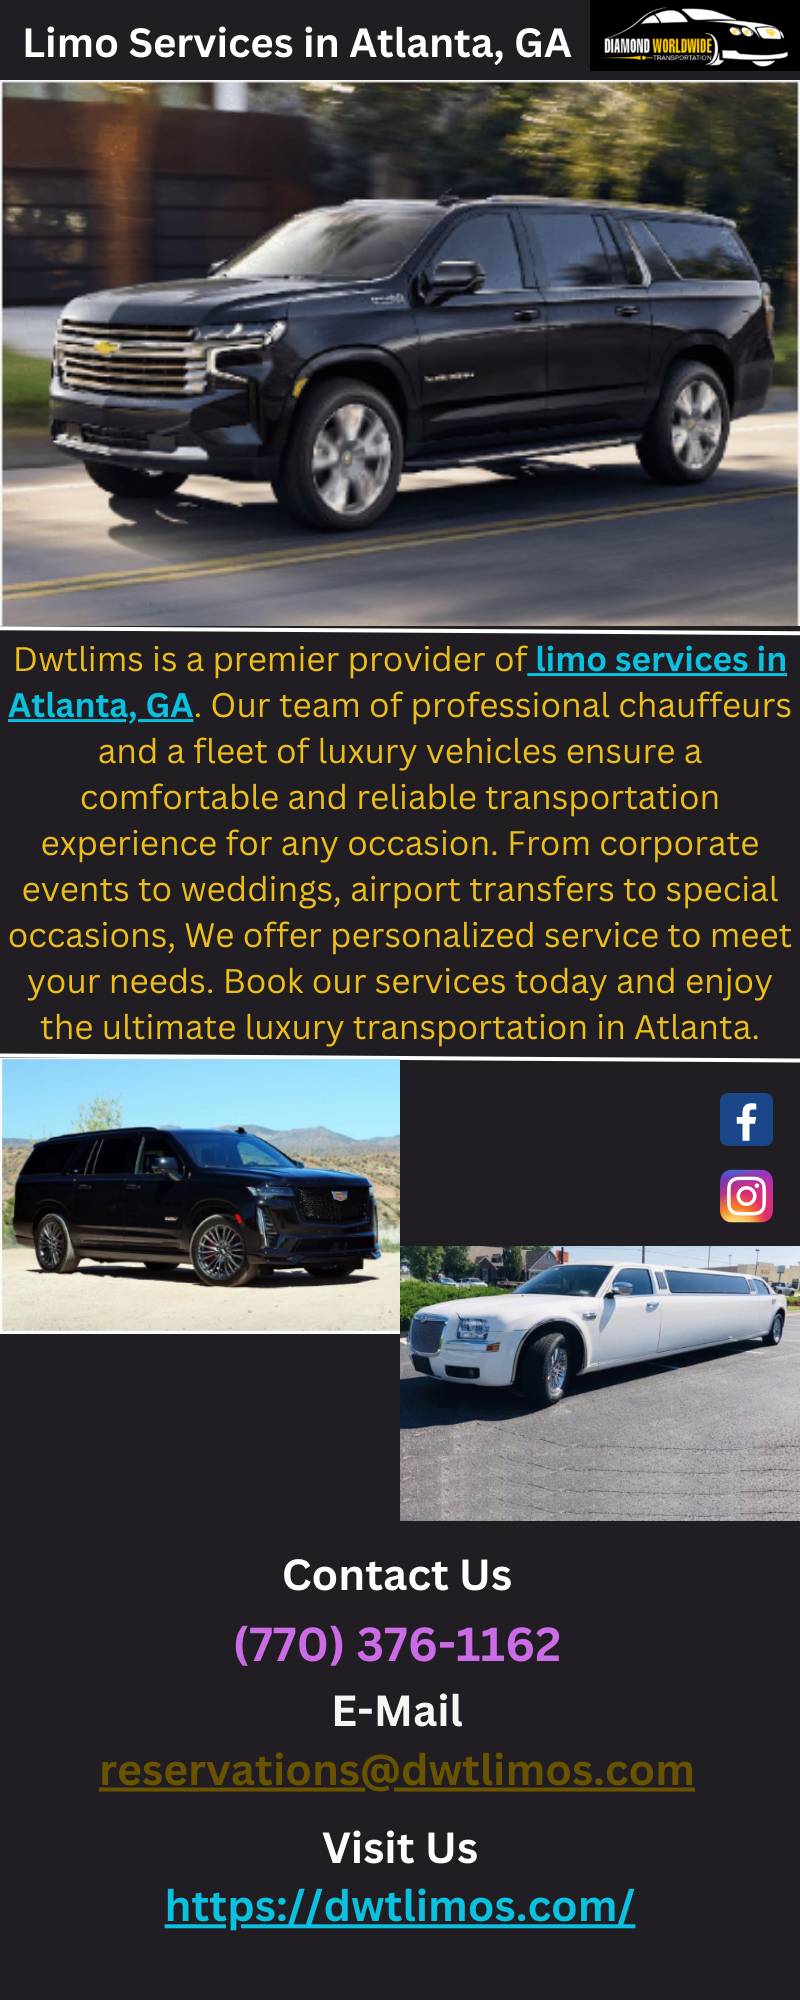 Experience Luxury Limo Services in Atlanta, GA - D